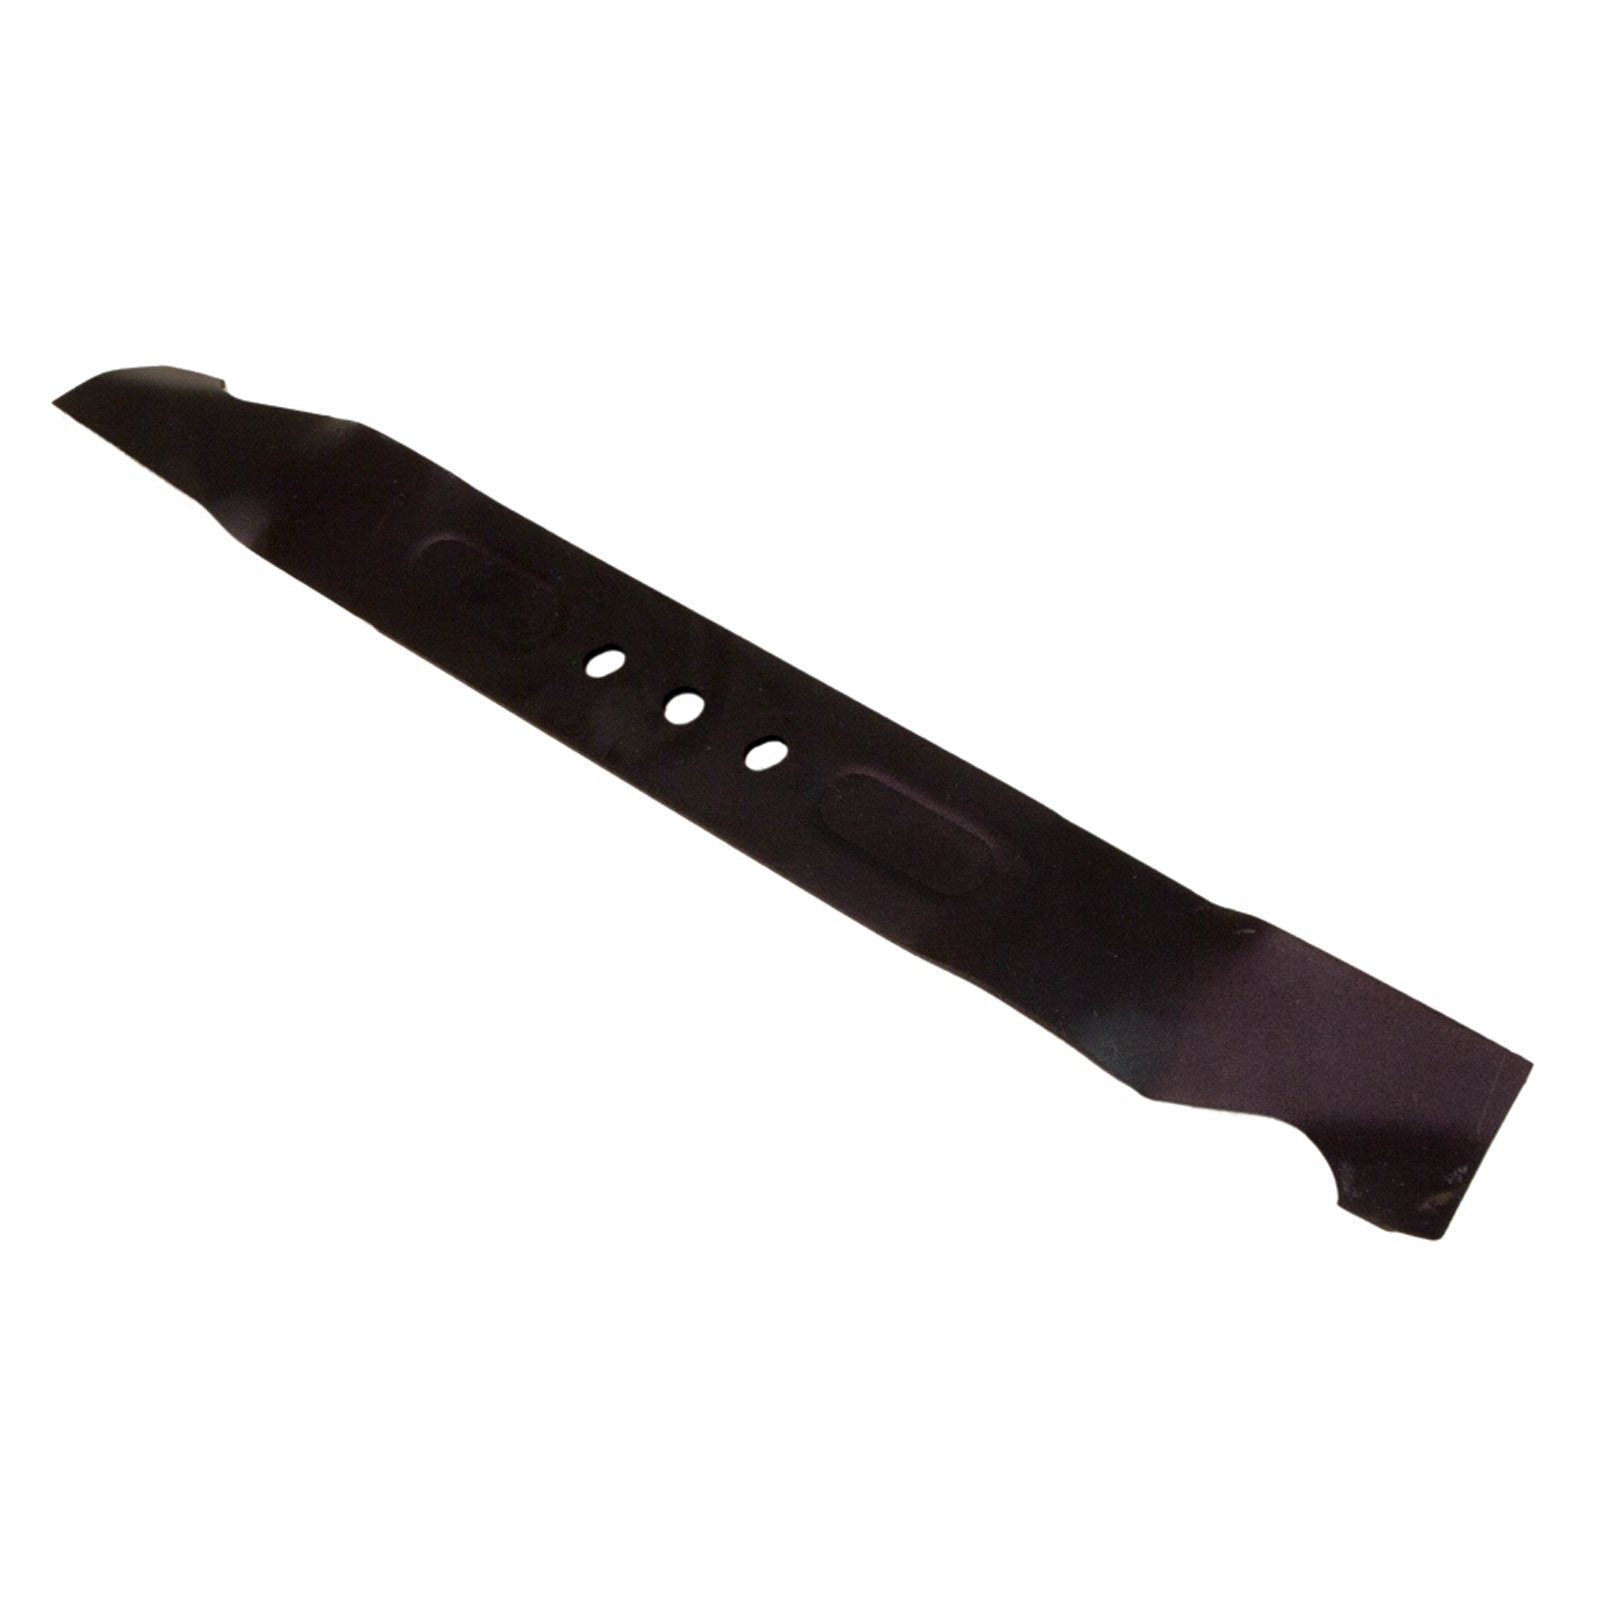 Lawn Mower Parts -21" Replacement Blade for Gas Lawn Mowers, Stock #: 303071037